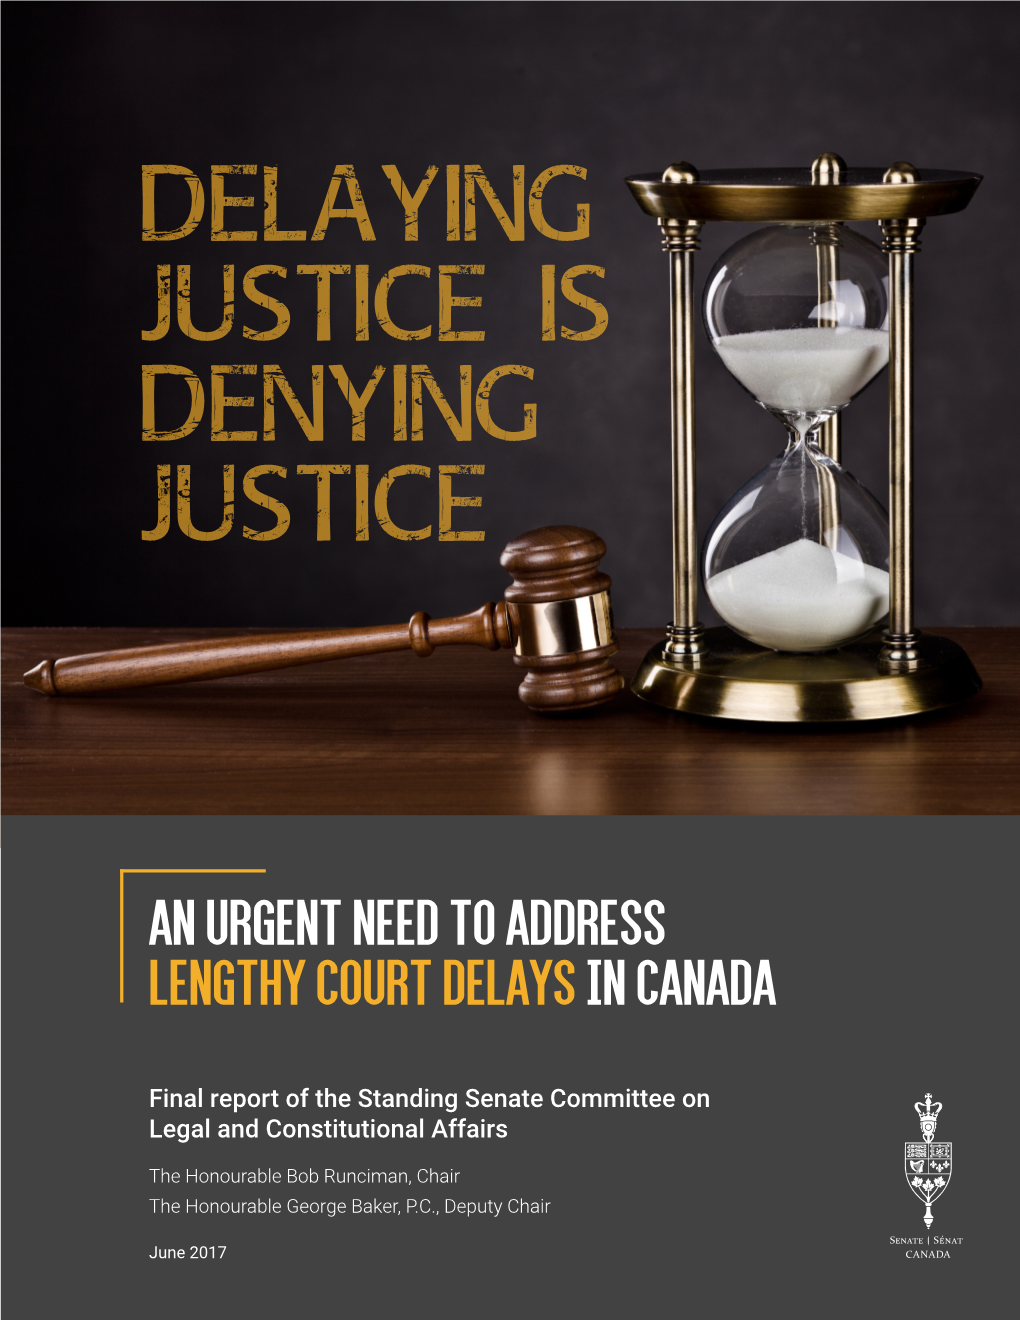 Delaying Justice Is Denying Justice: an Urgent Need to Address Lengthy Court Delays in Canada (Final Report), June 2017